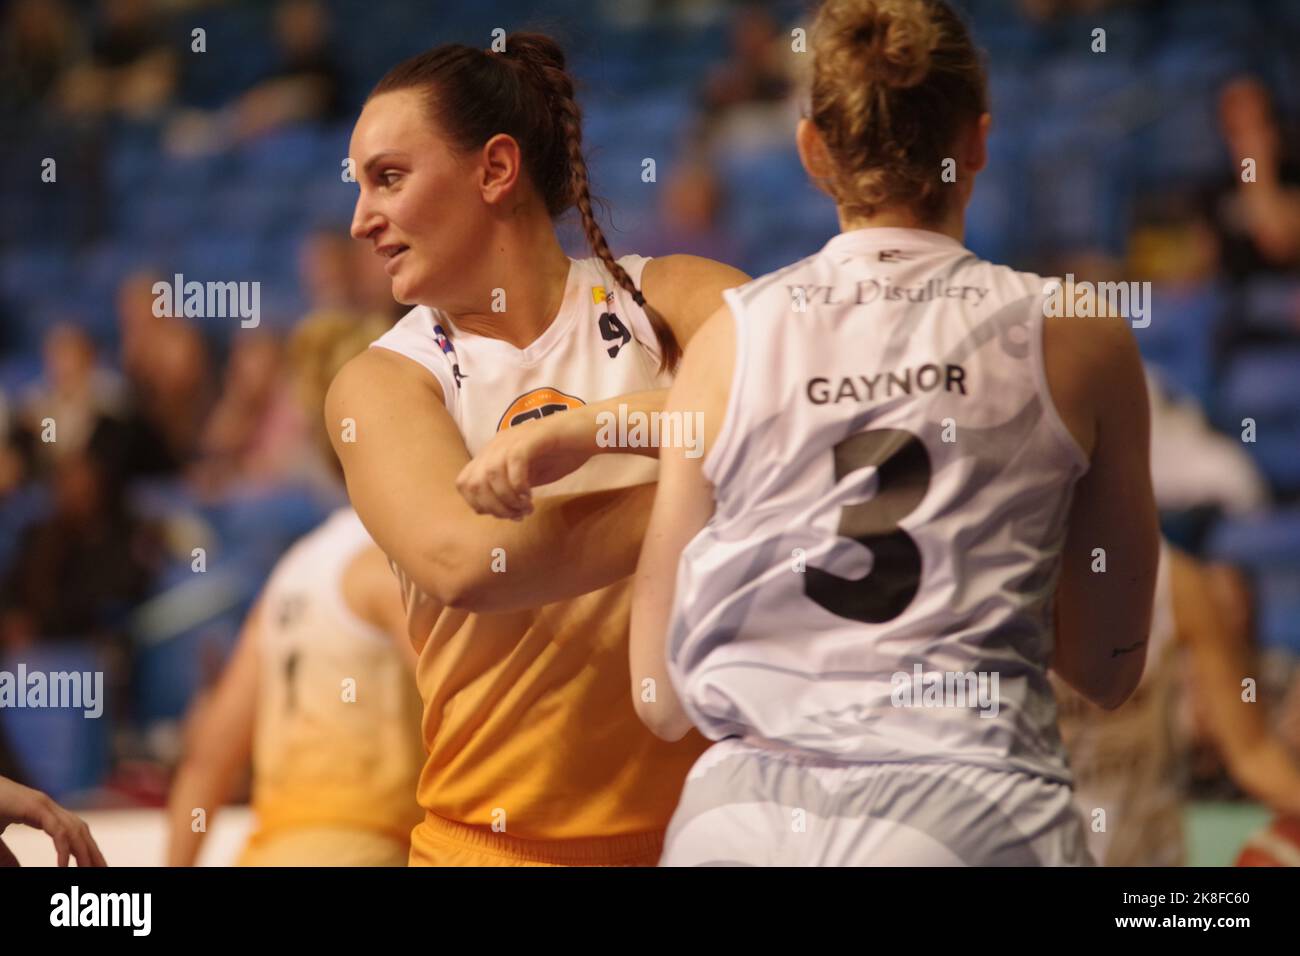 Sheffield, England, 23 October 2022. Helen Naylor playing for Sheffield Hatters against Newcastle Eagles in a WBBL match at Ponds Forge. Credit: Colin Edwards/Alamy Live News. Stock Photo